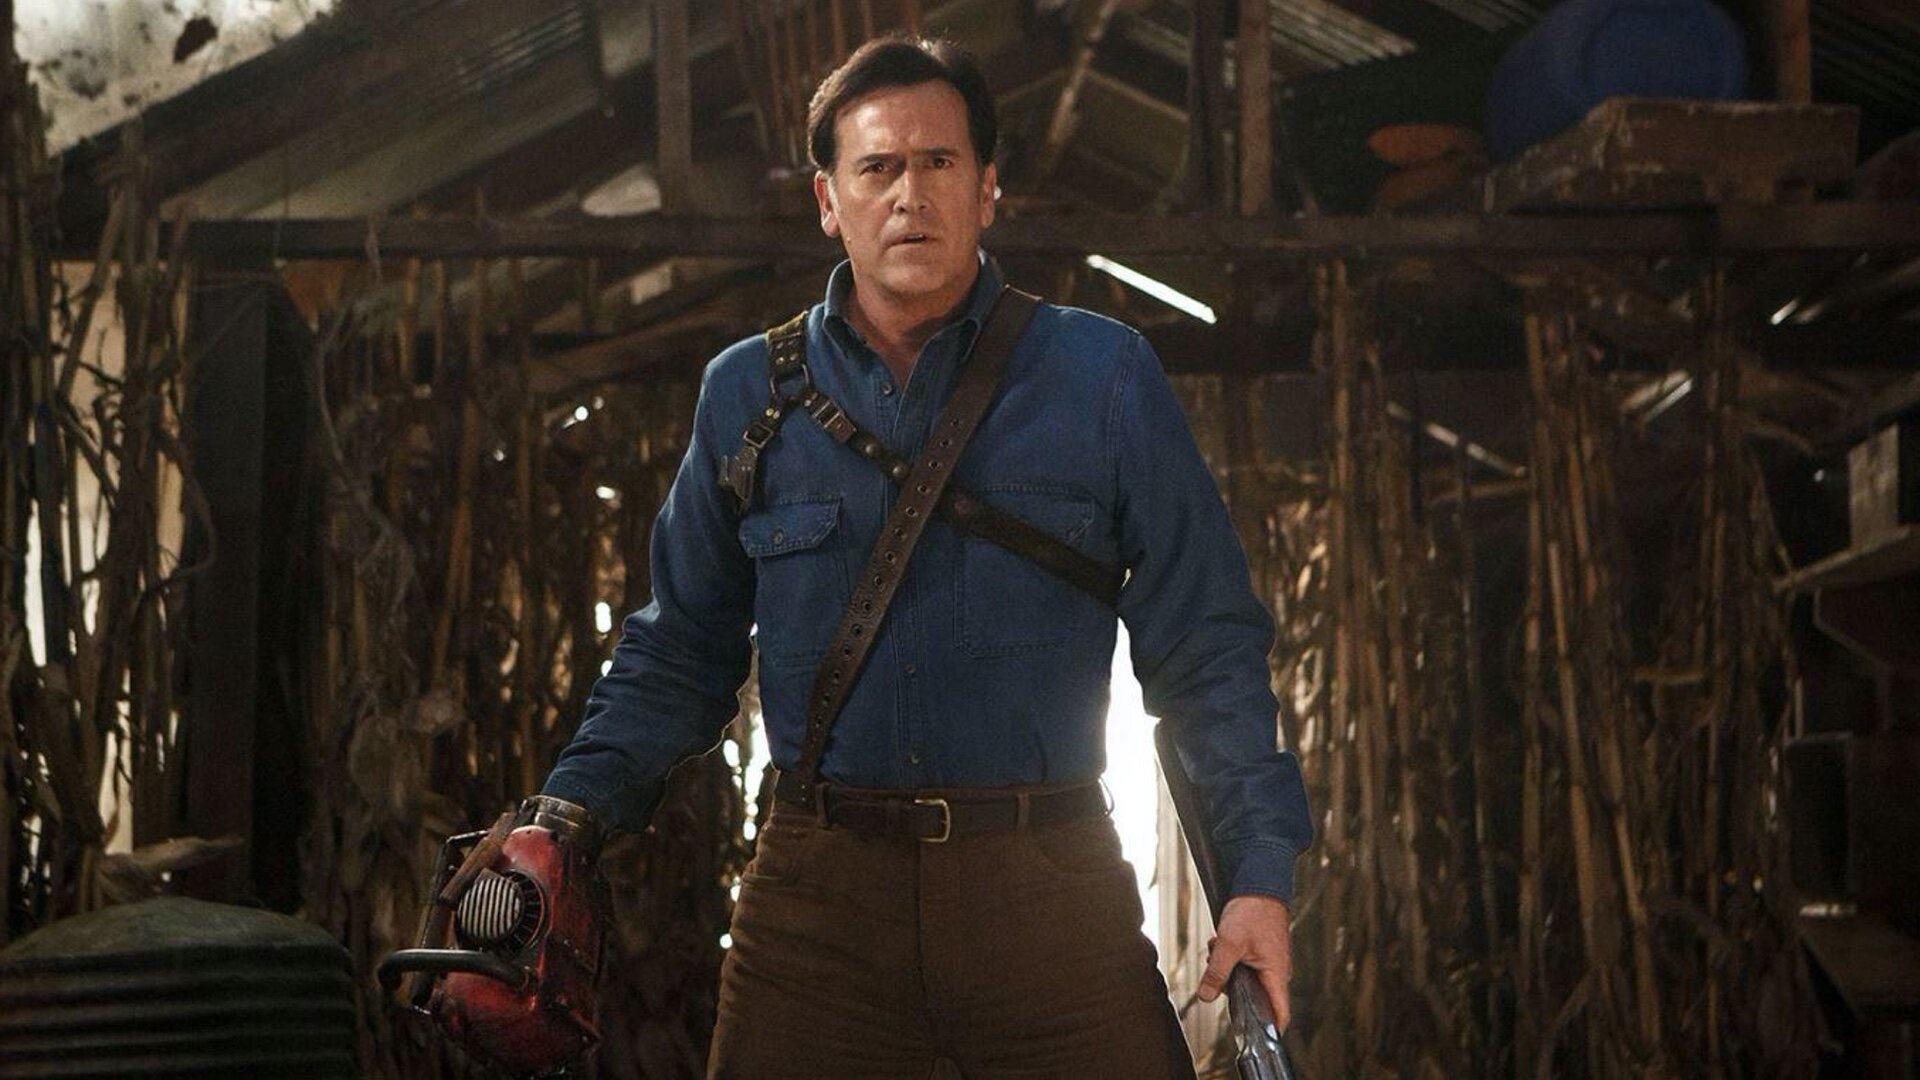 Bruce Campbell: Ashley Joanna Williams, The anti-hero protagonist of the Evil Dead series. 1920x1080 Full HD Wallpaper.